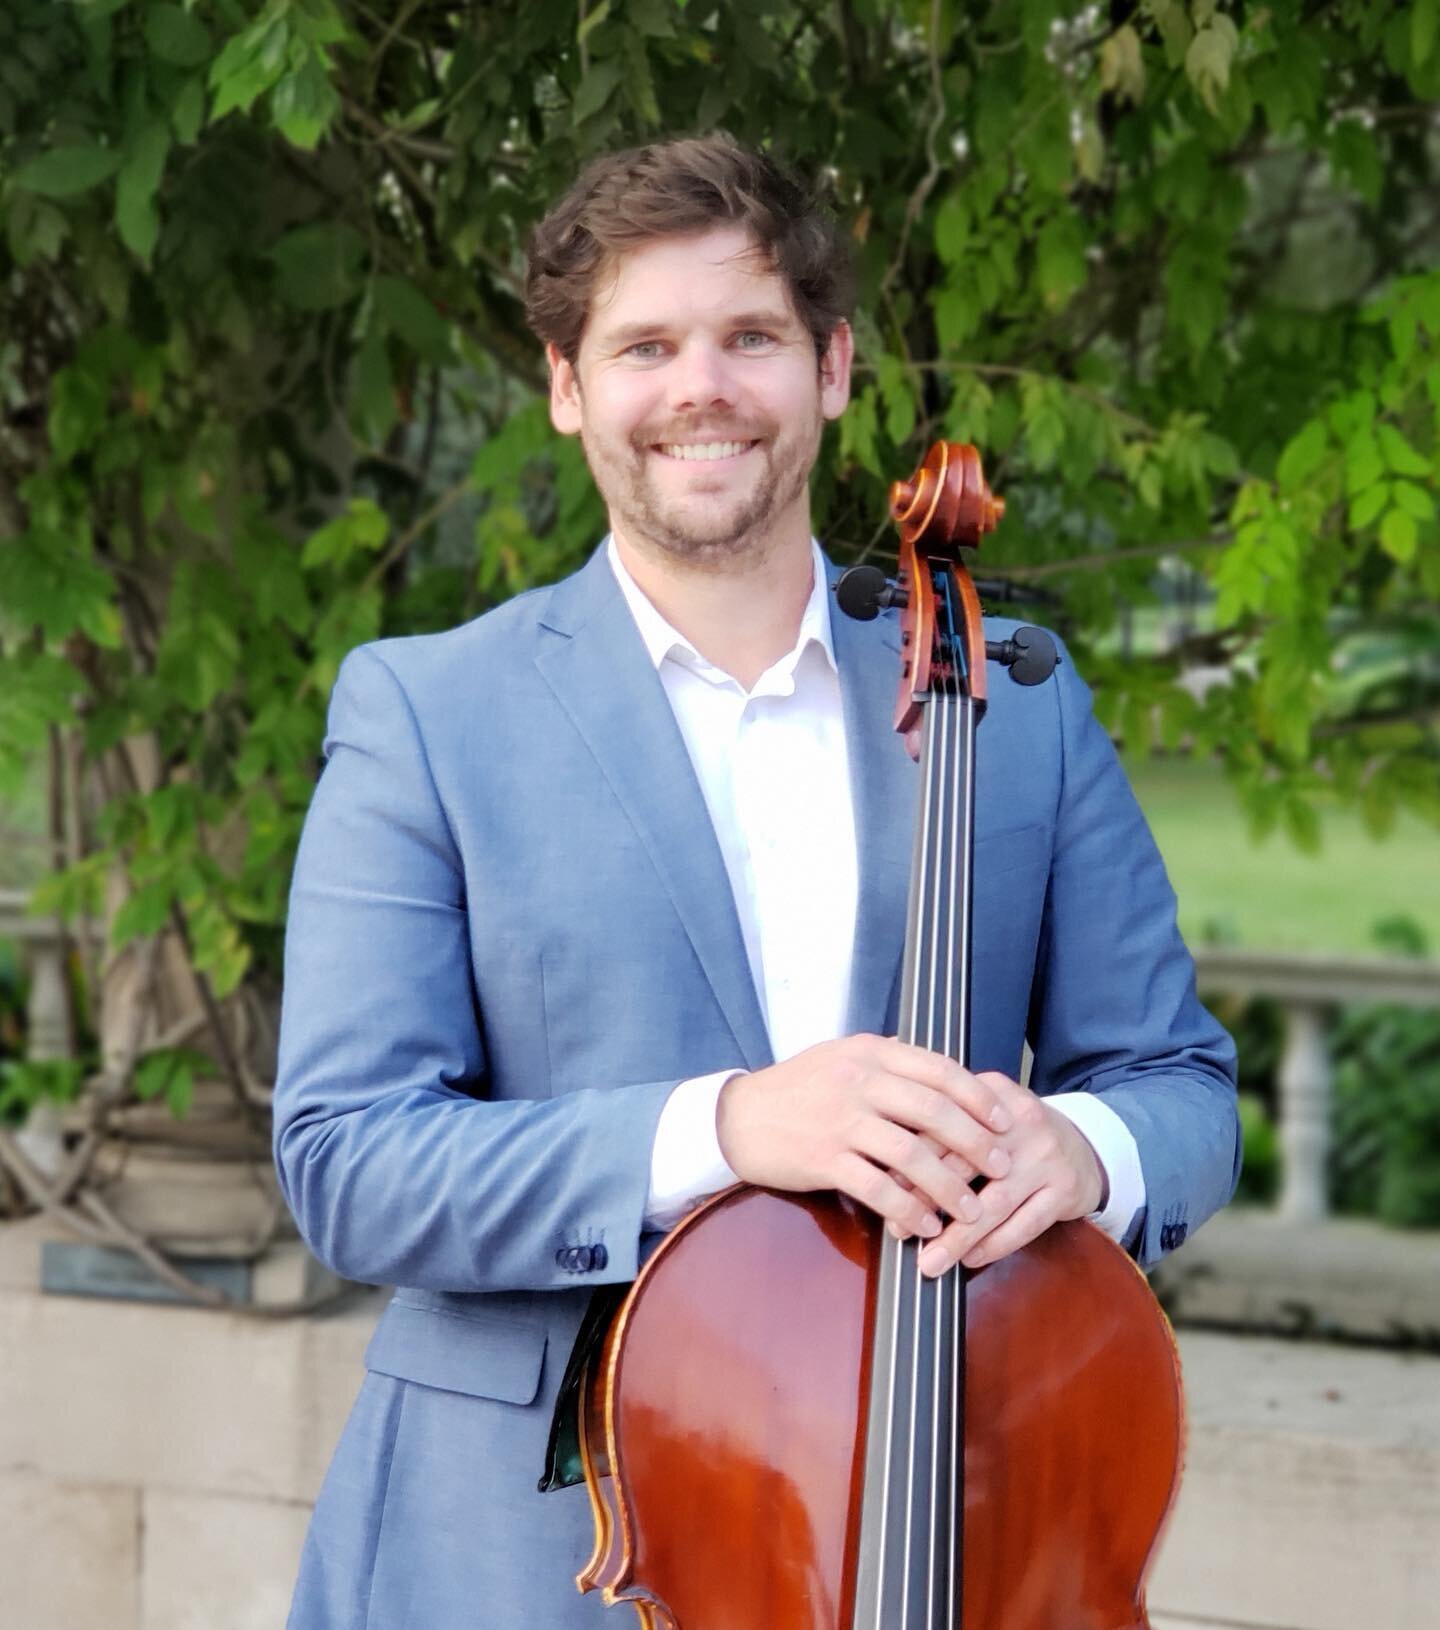 Today we welcome Mr. Jake Fowler, cellist, to our summer camp! He will be teaching cello lessons, coaching chamber music, and performing for our students!
. . . . . . . . . . . 

New Orleans-based cellist Jacob Fowler is the Founding Director of the 